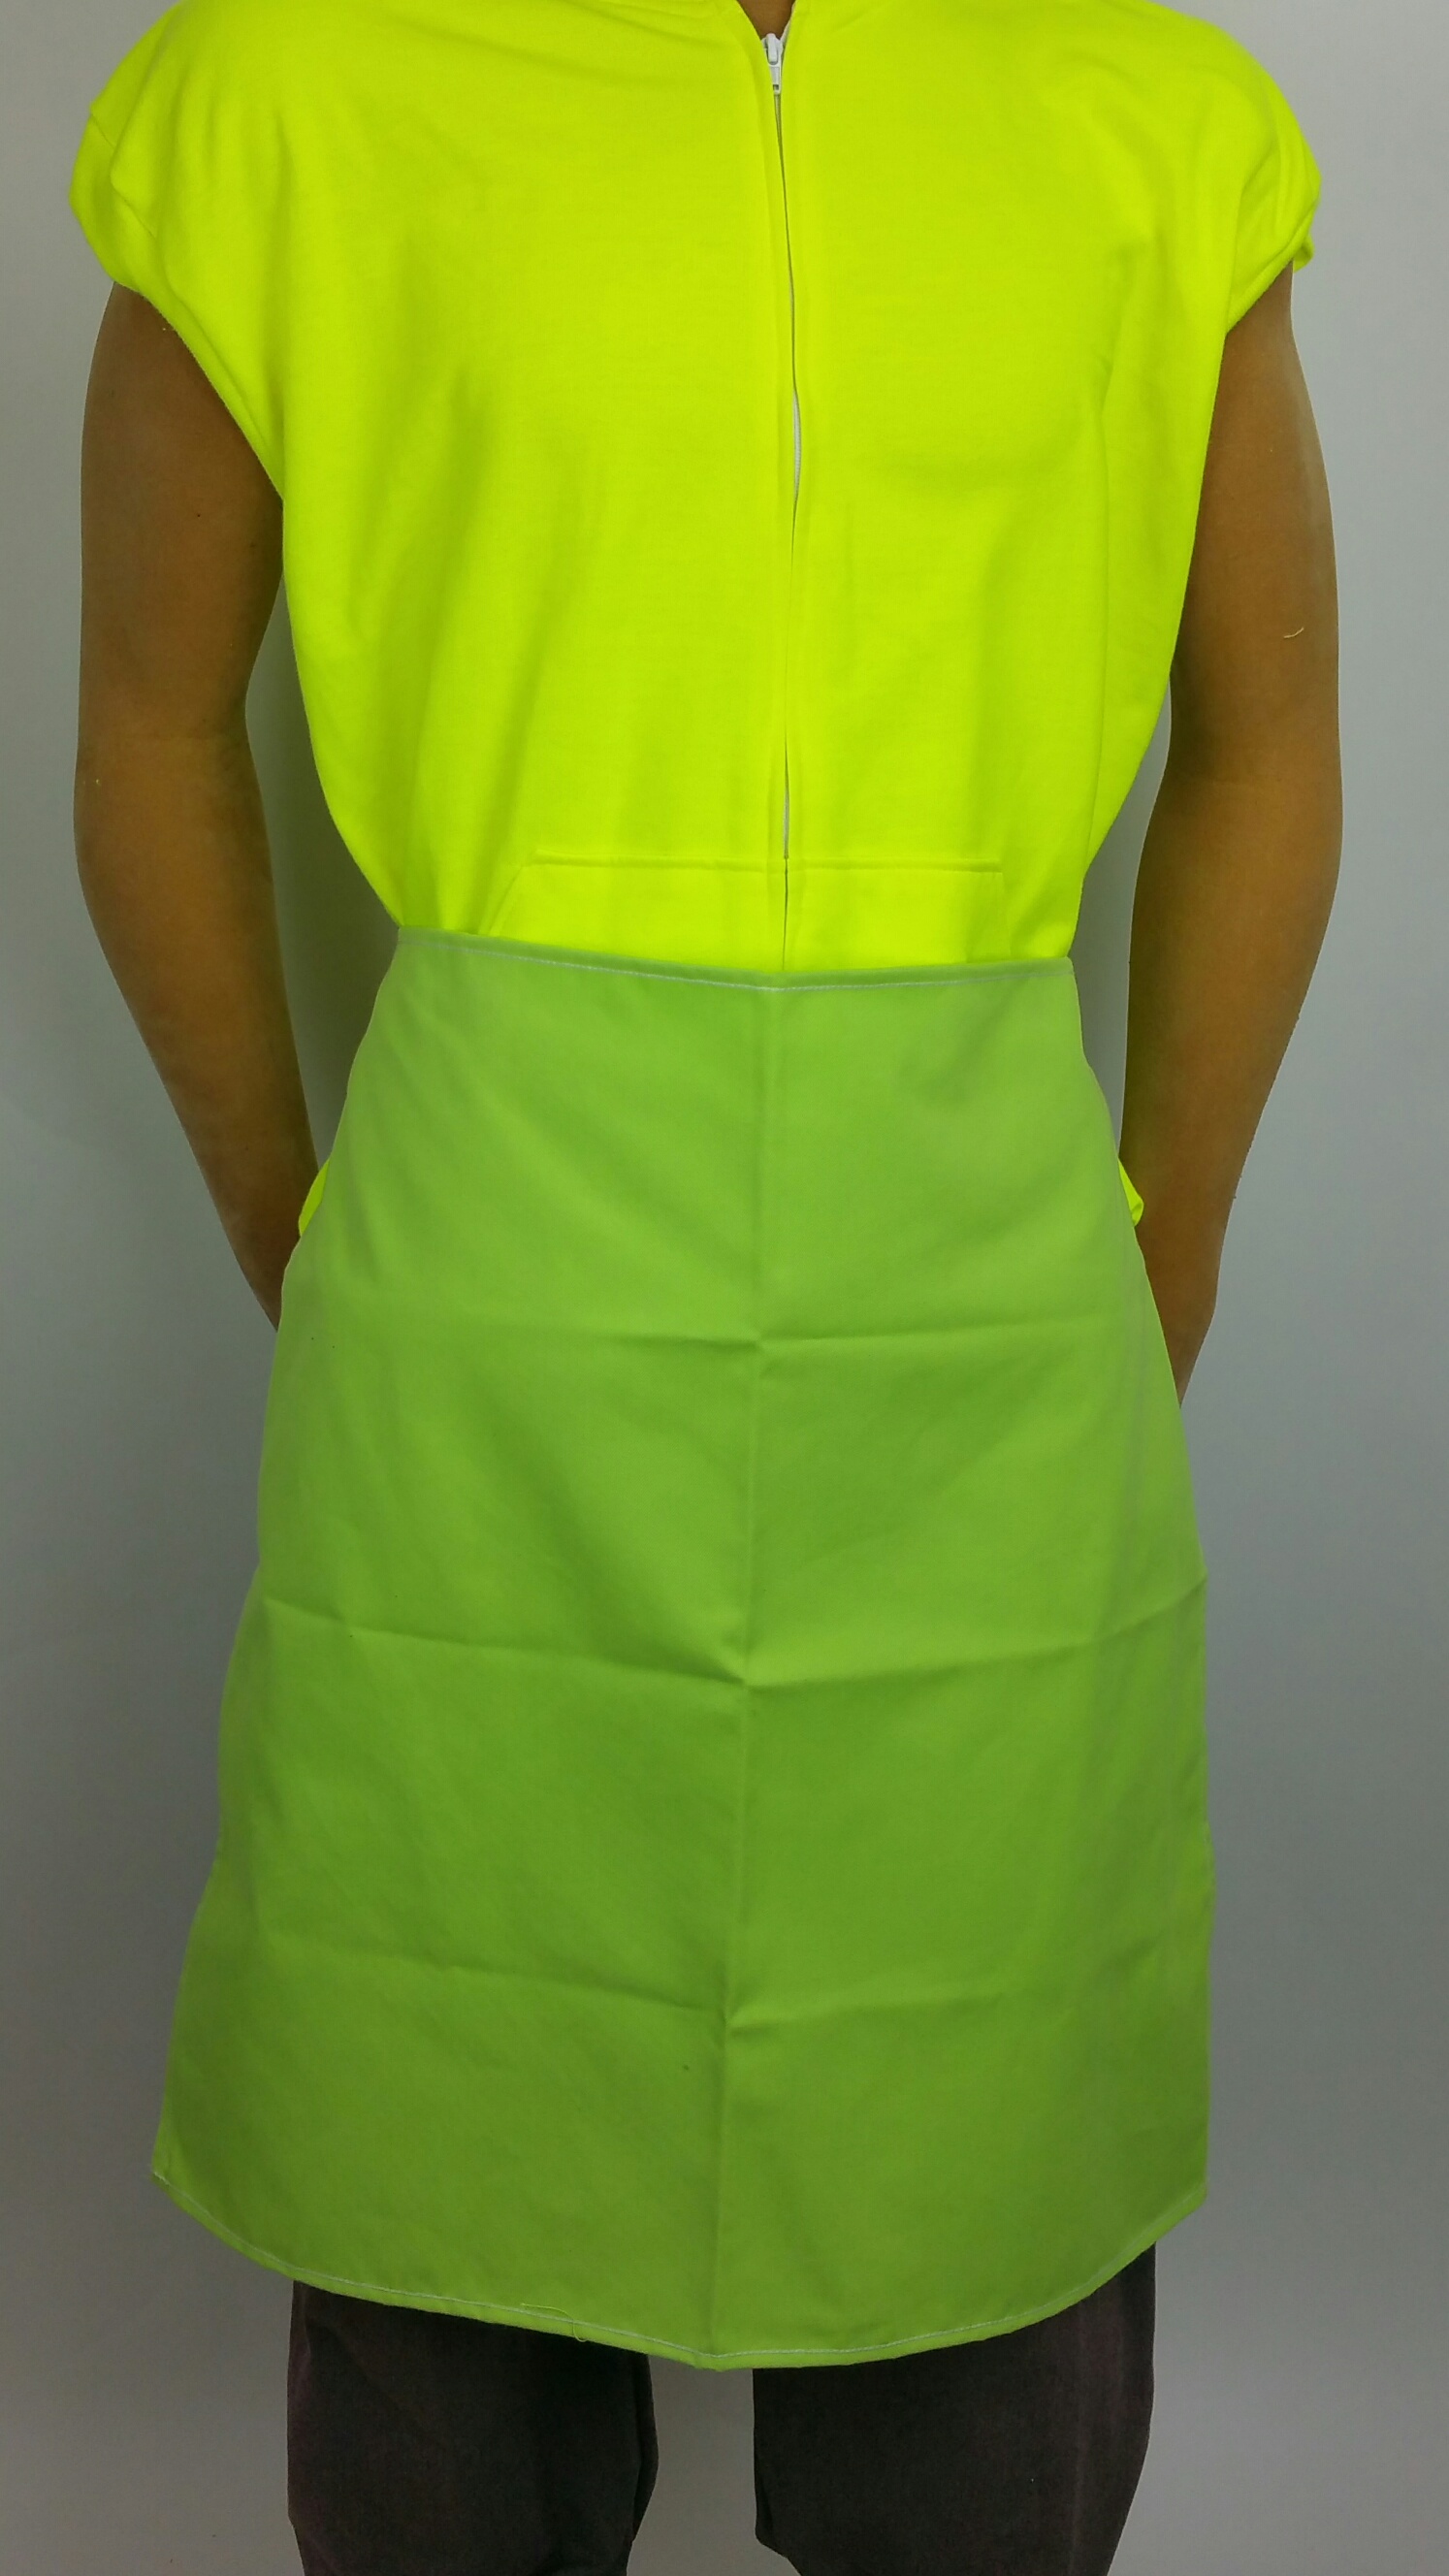 APRON BARRWELD® FR LIME YELLOW 1/2CTN TWILL TAPE - Latex, Supported